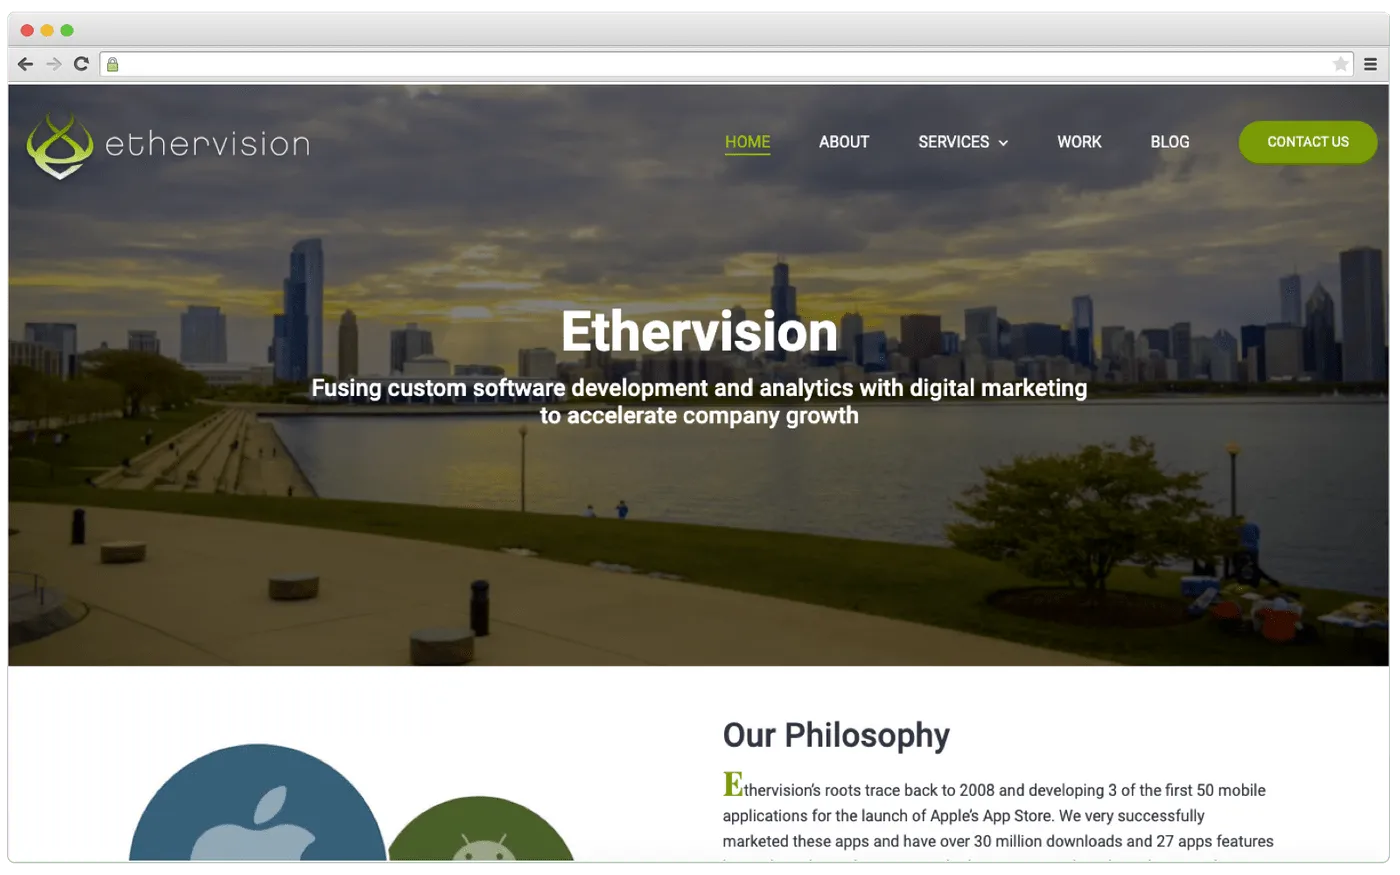 Ethervision